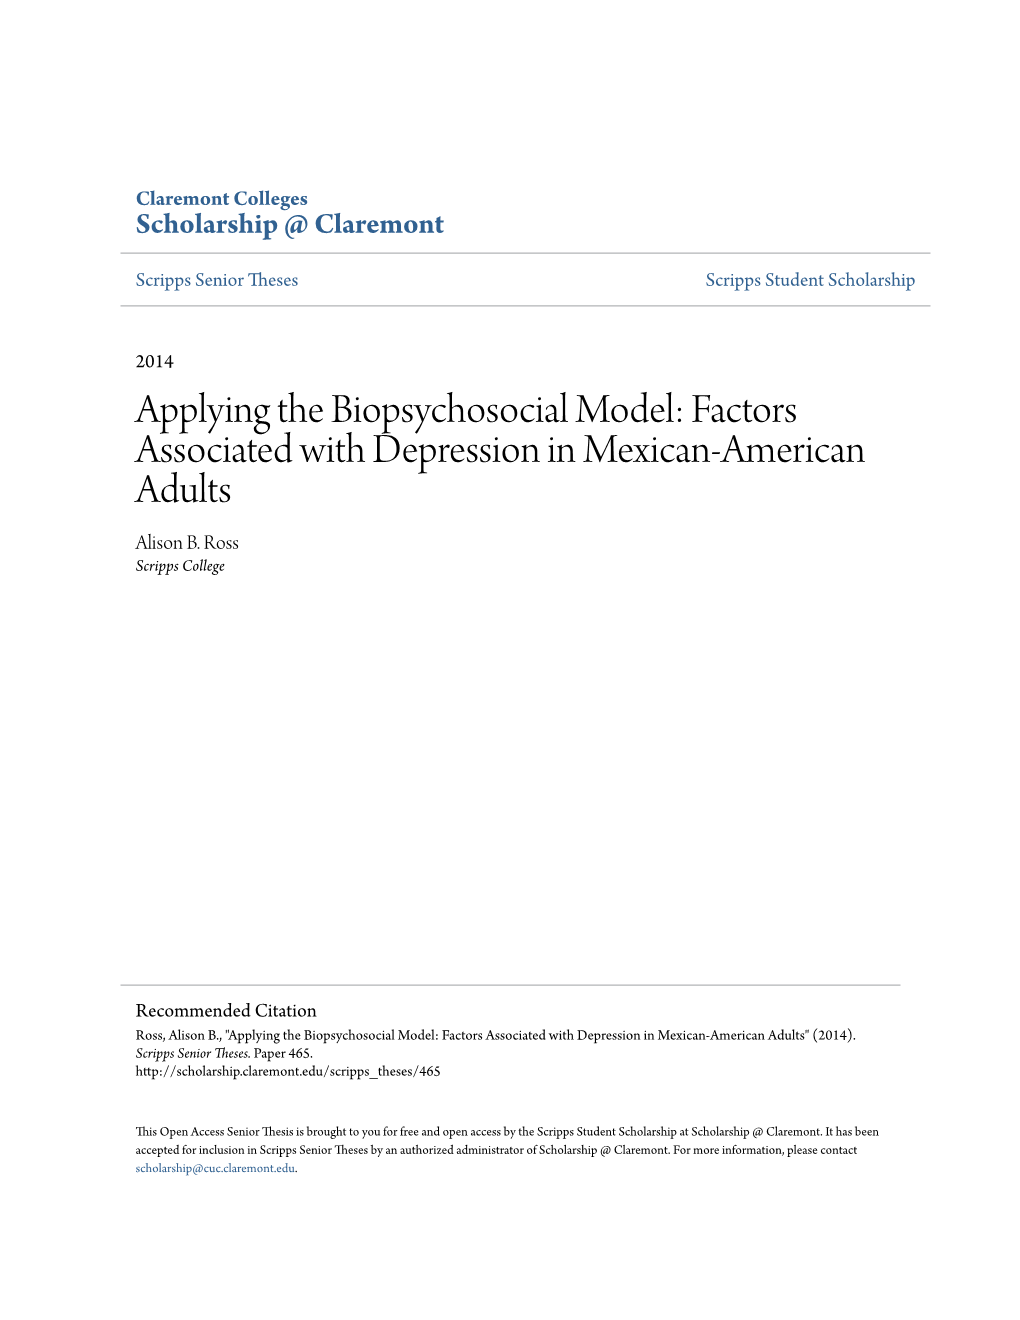 Applying the Biopsychosocial Model: Factors Associated with Depression in Mexican-American Adults Alison B